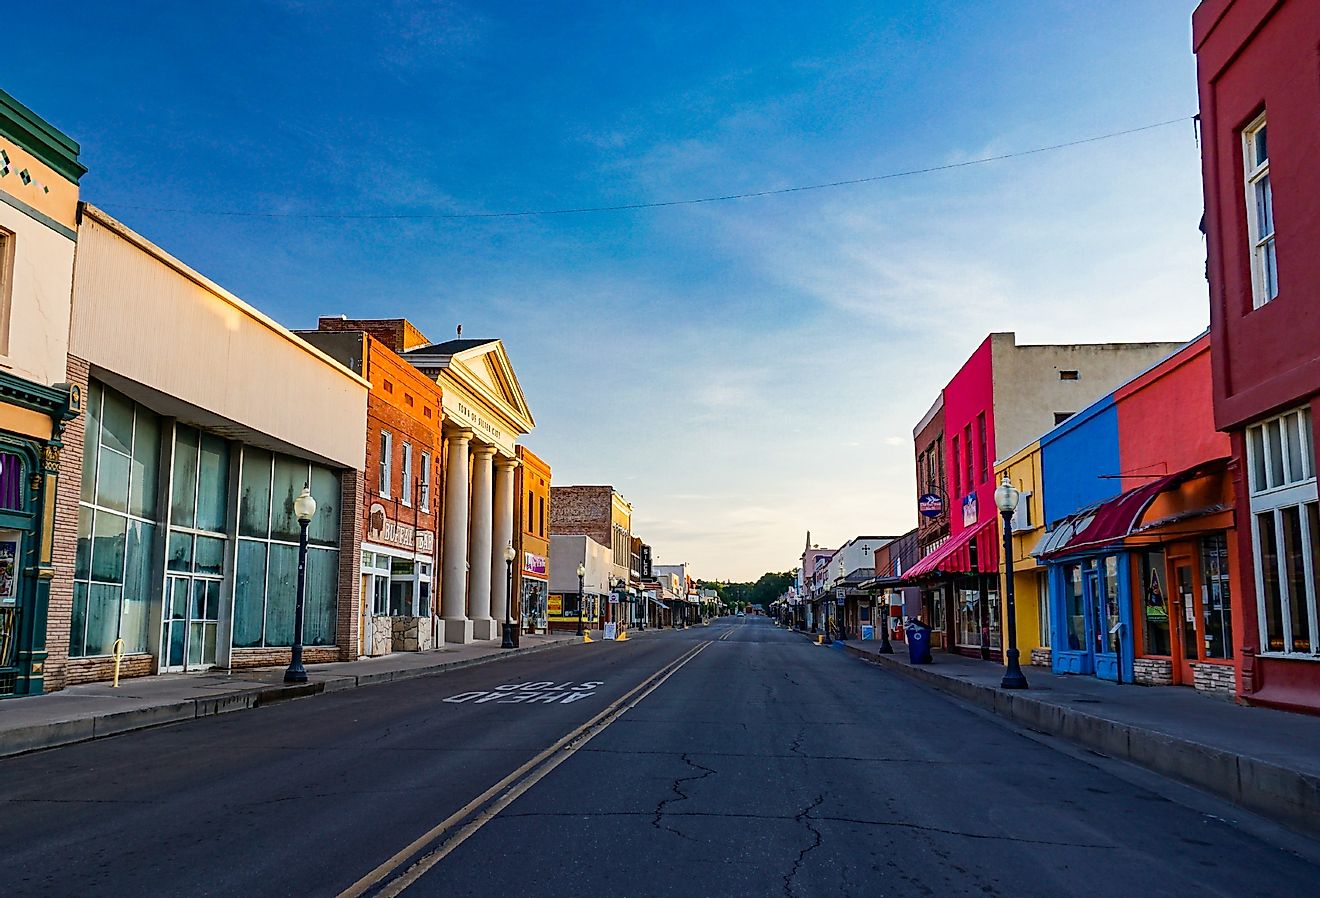 Historic downtown Silver City, New Mexico. Image credit Underawesternsky via Shutterstock.com